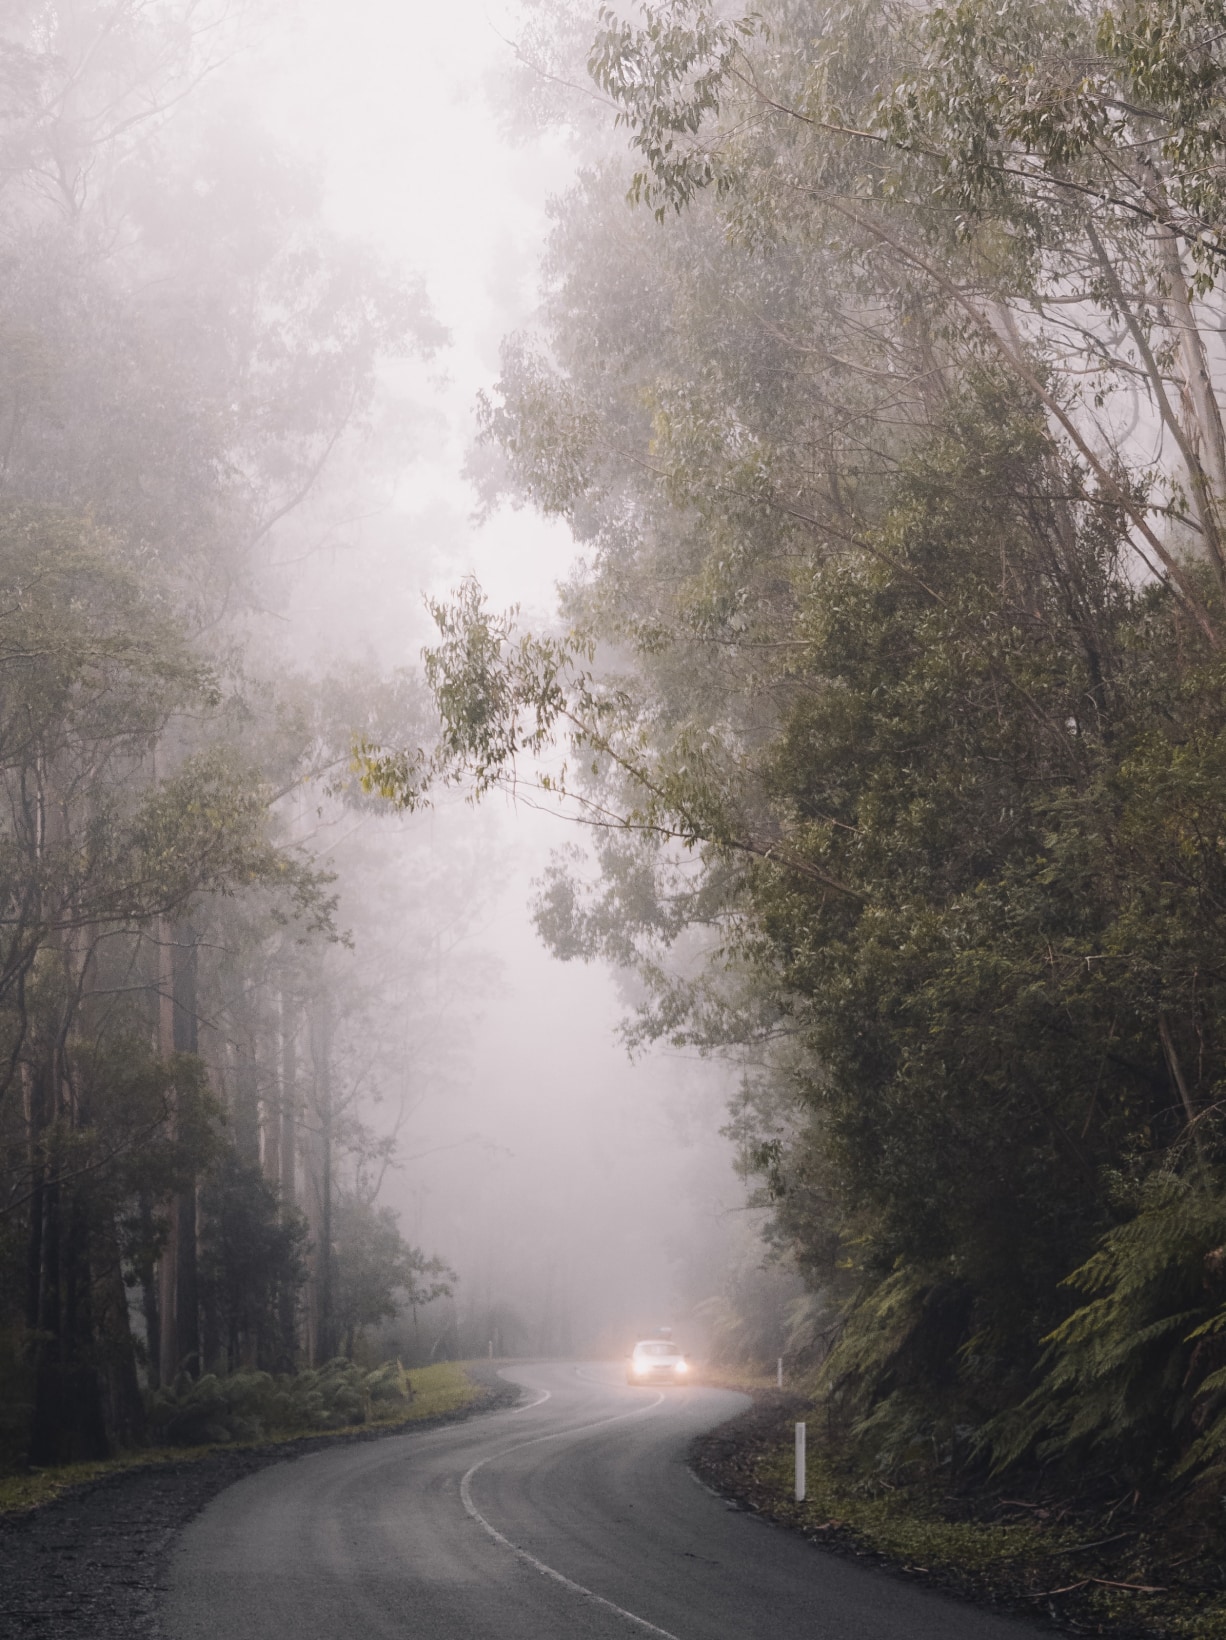 post inner image1 2 - Lost in wonder traveling through the windy, misty roads engulfed in towering trees